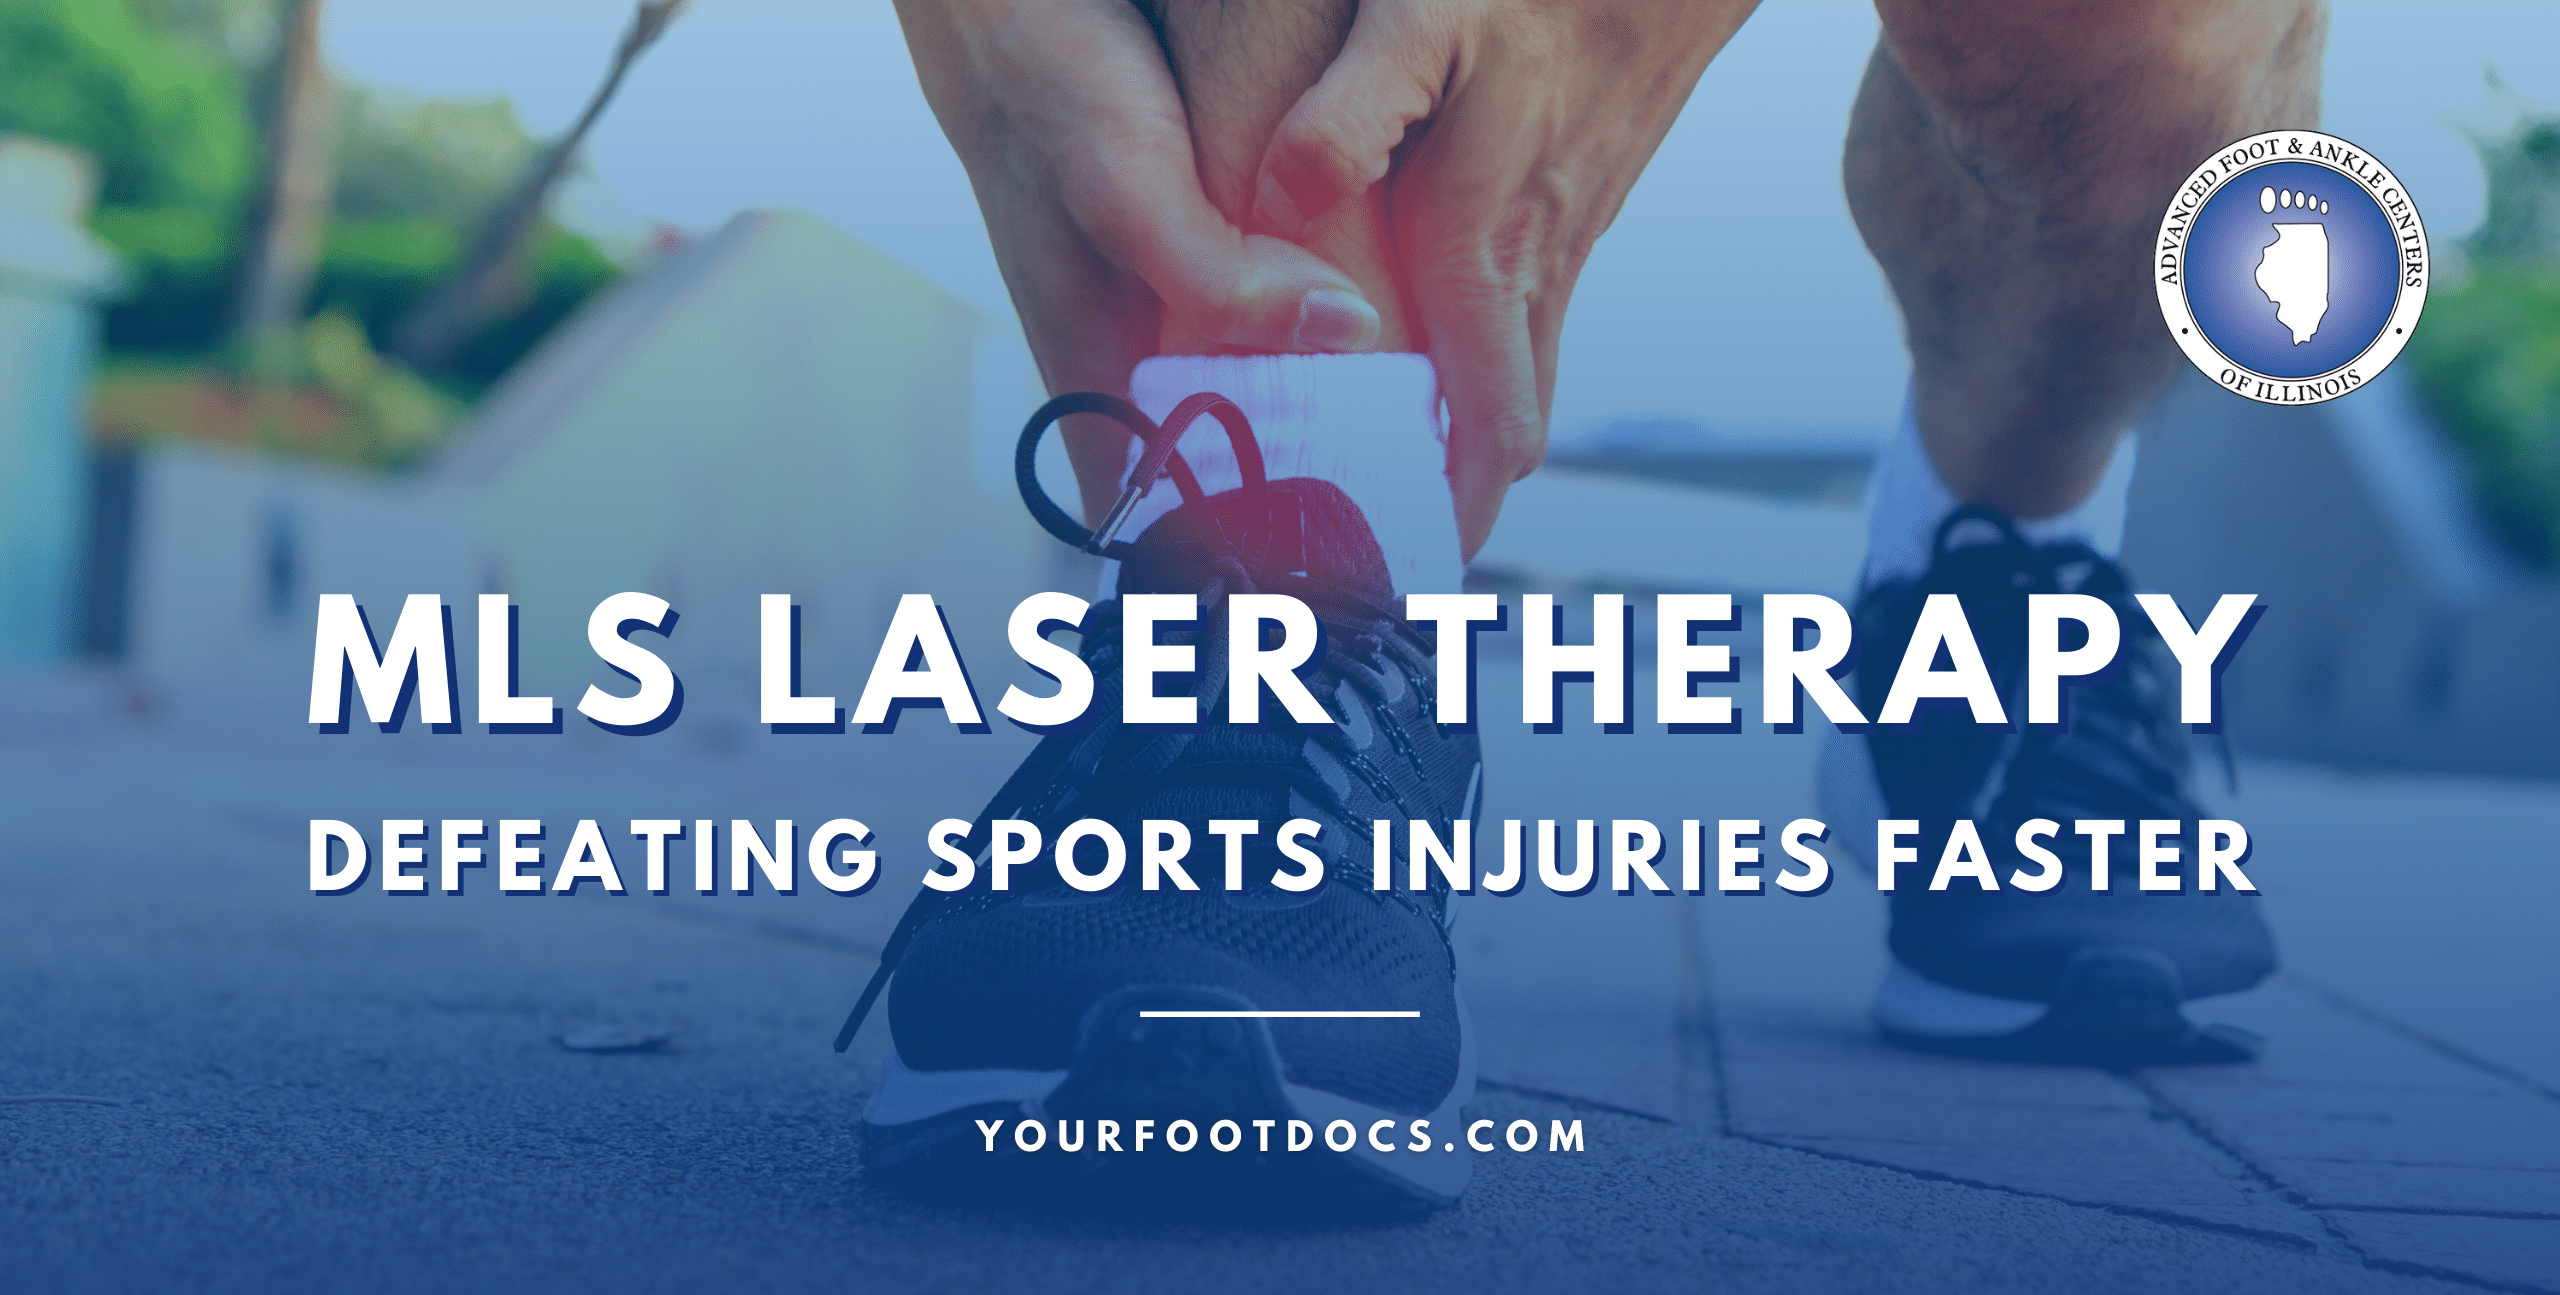 MLS Laser Therapy Defeating Sports Injuries Faster Graphic